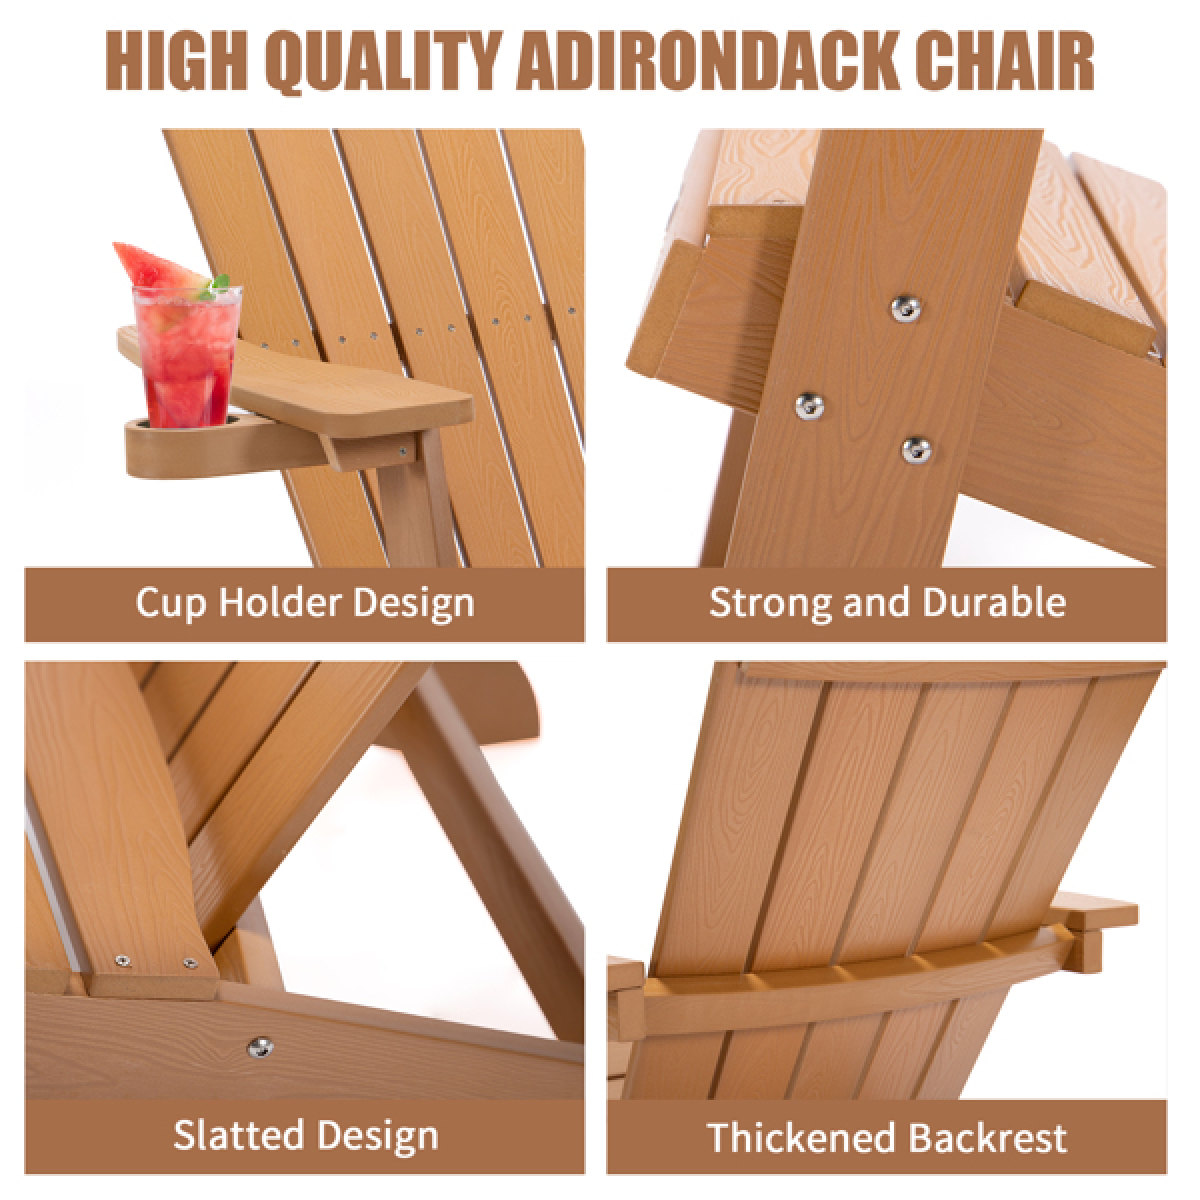 [Quick Delivery] Adirondack Chair, Outdoor Weather Resistant 380 lbs Capacity Load Plastic Patio Chairs for Pool Patio Deck Garden, Backyard Polystyrene Adirondack Chair,Brown - image 5 of 14